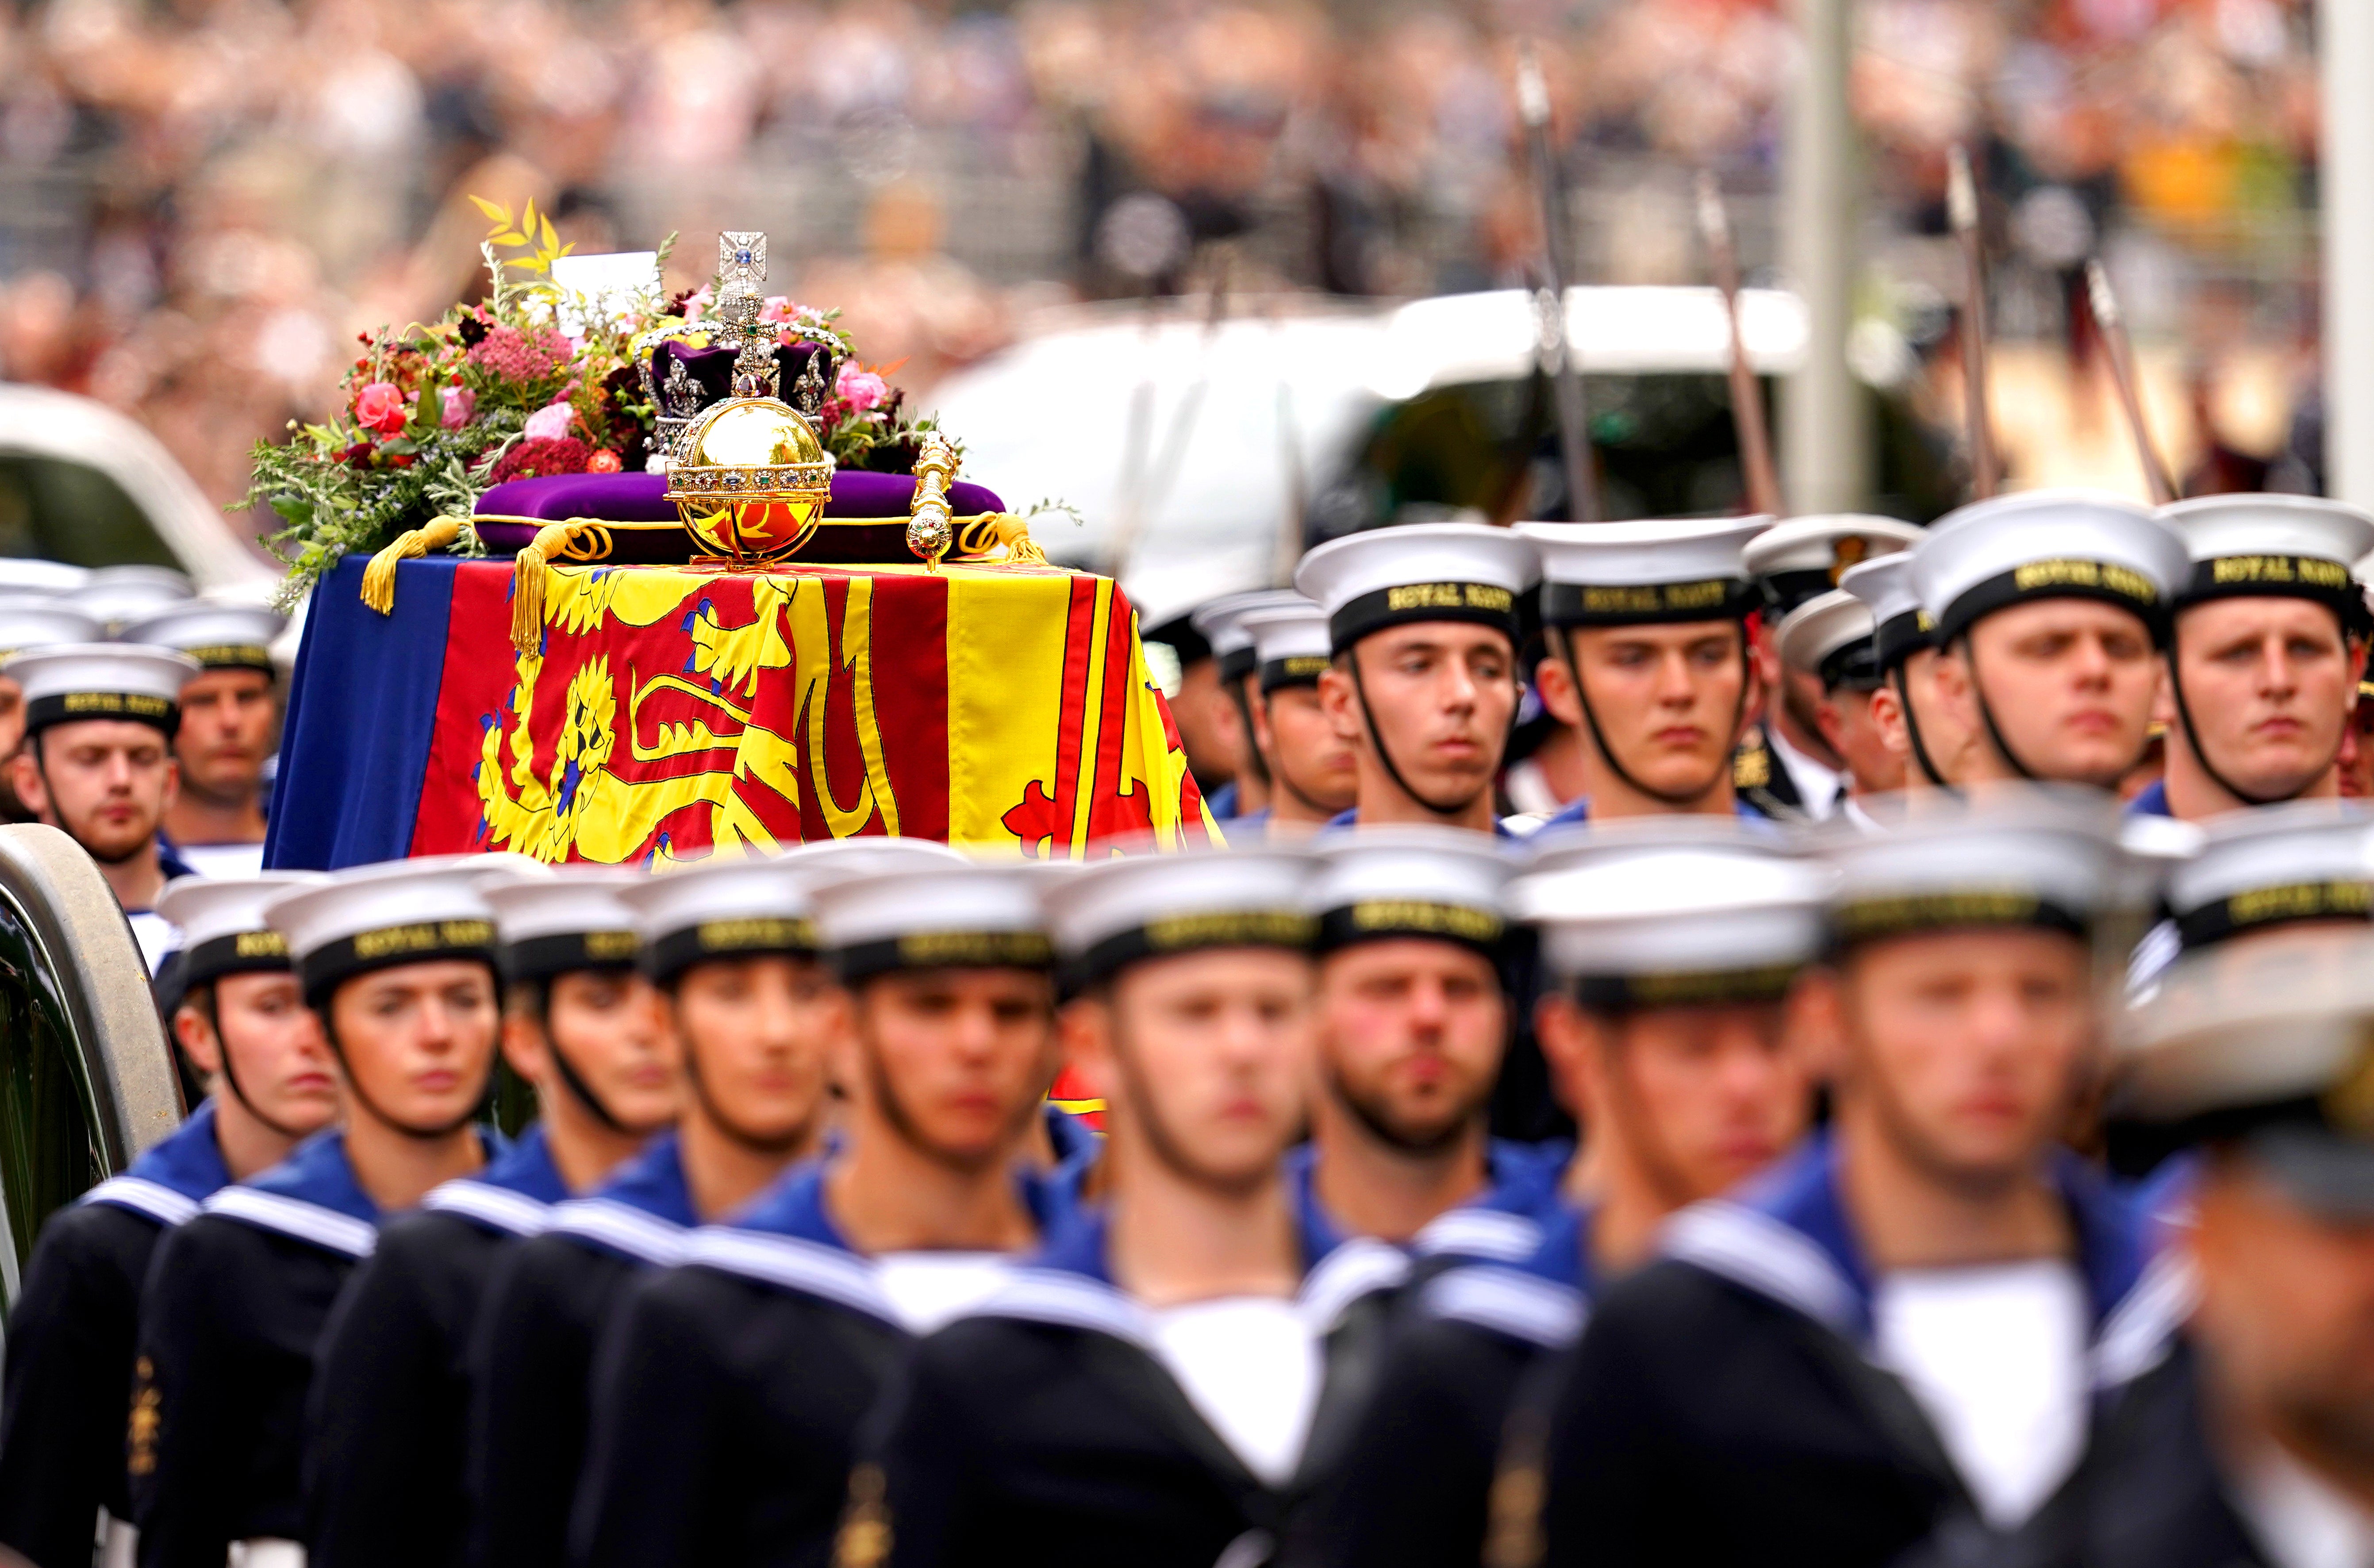 The Queen’s coffin being carried to Westminster Abbey